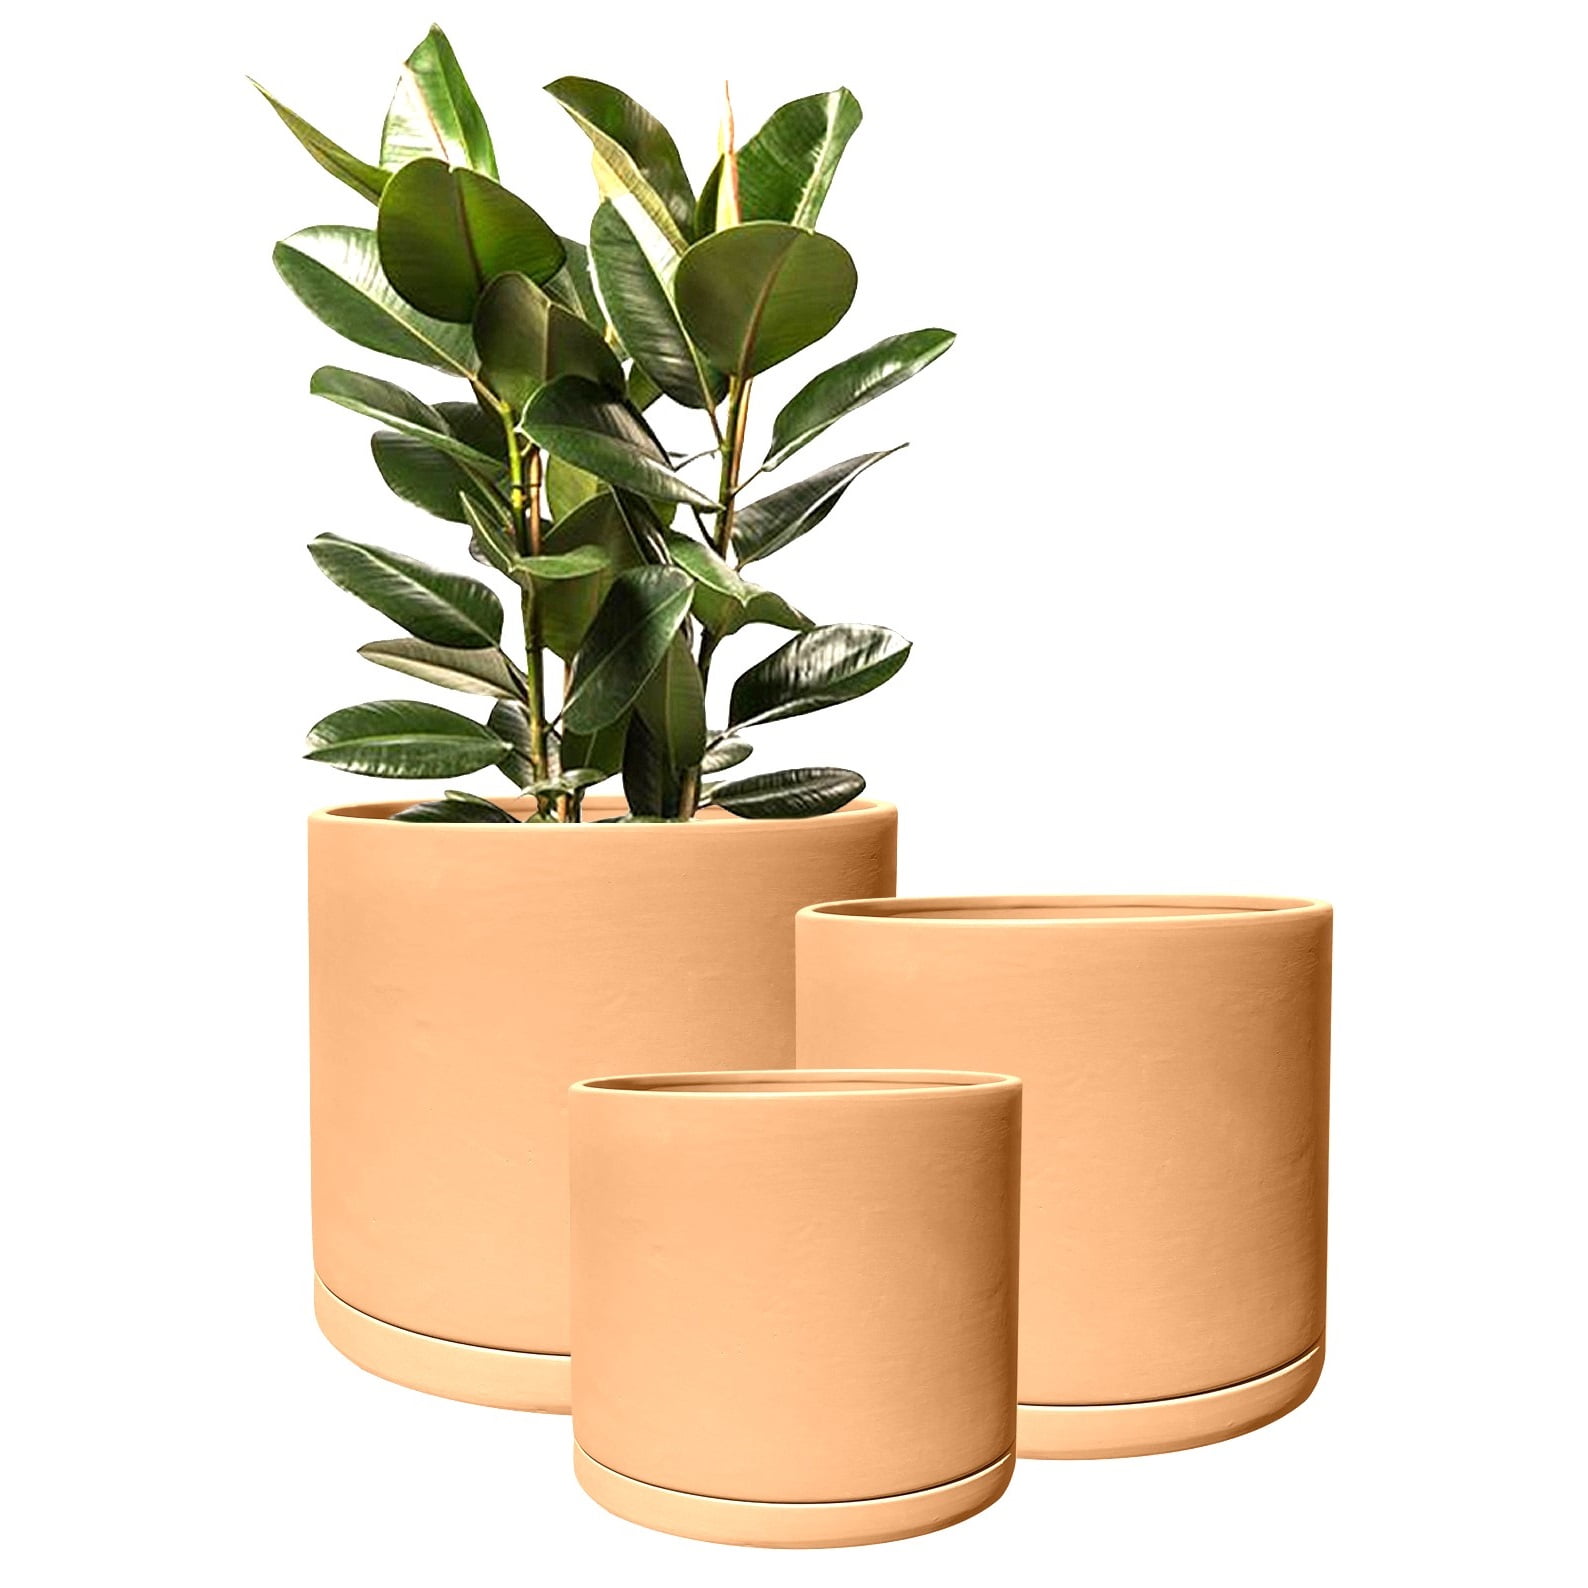 Olly & Rose Rome Terracotta Plant Pots Garden Planters Set 3 Indoor Outdoor  Ceramic Plant Pots with Saucers 